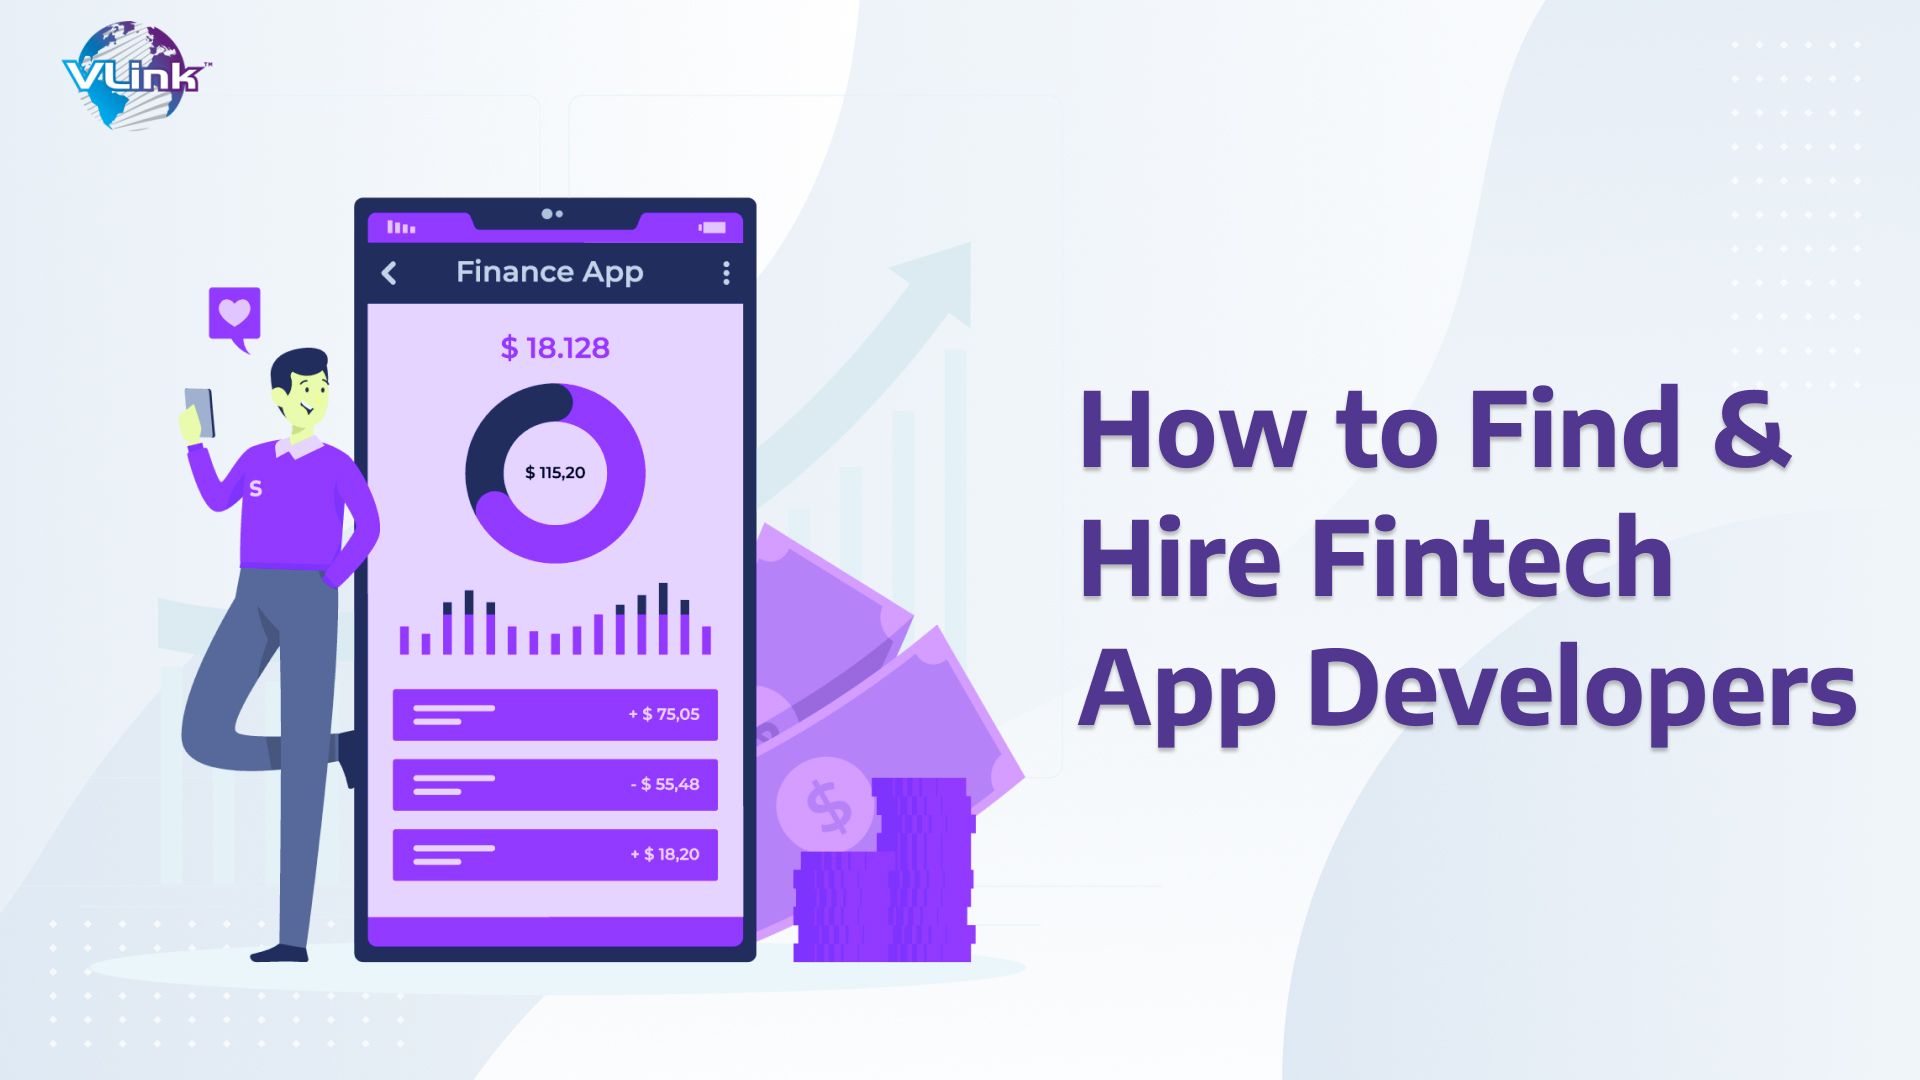 How to find & hire fintech app developers